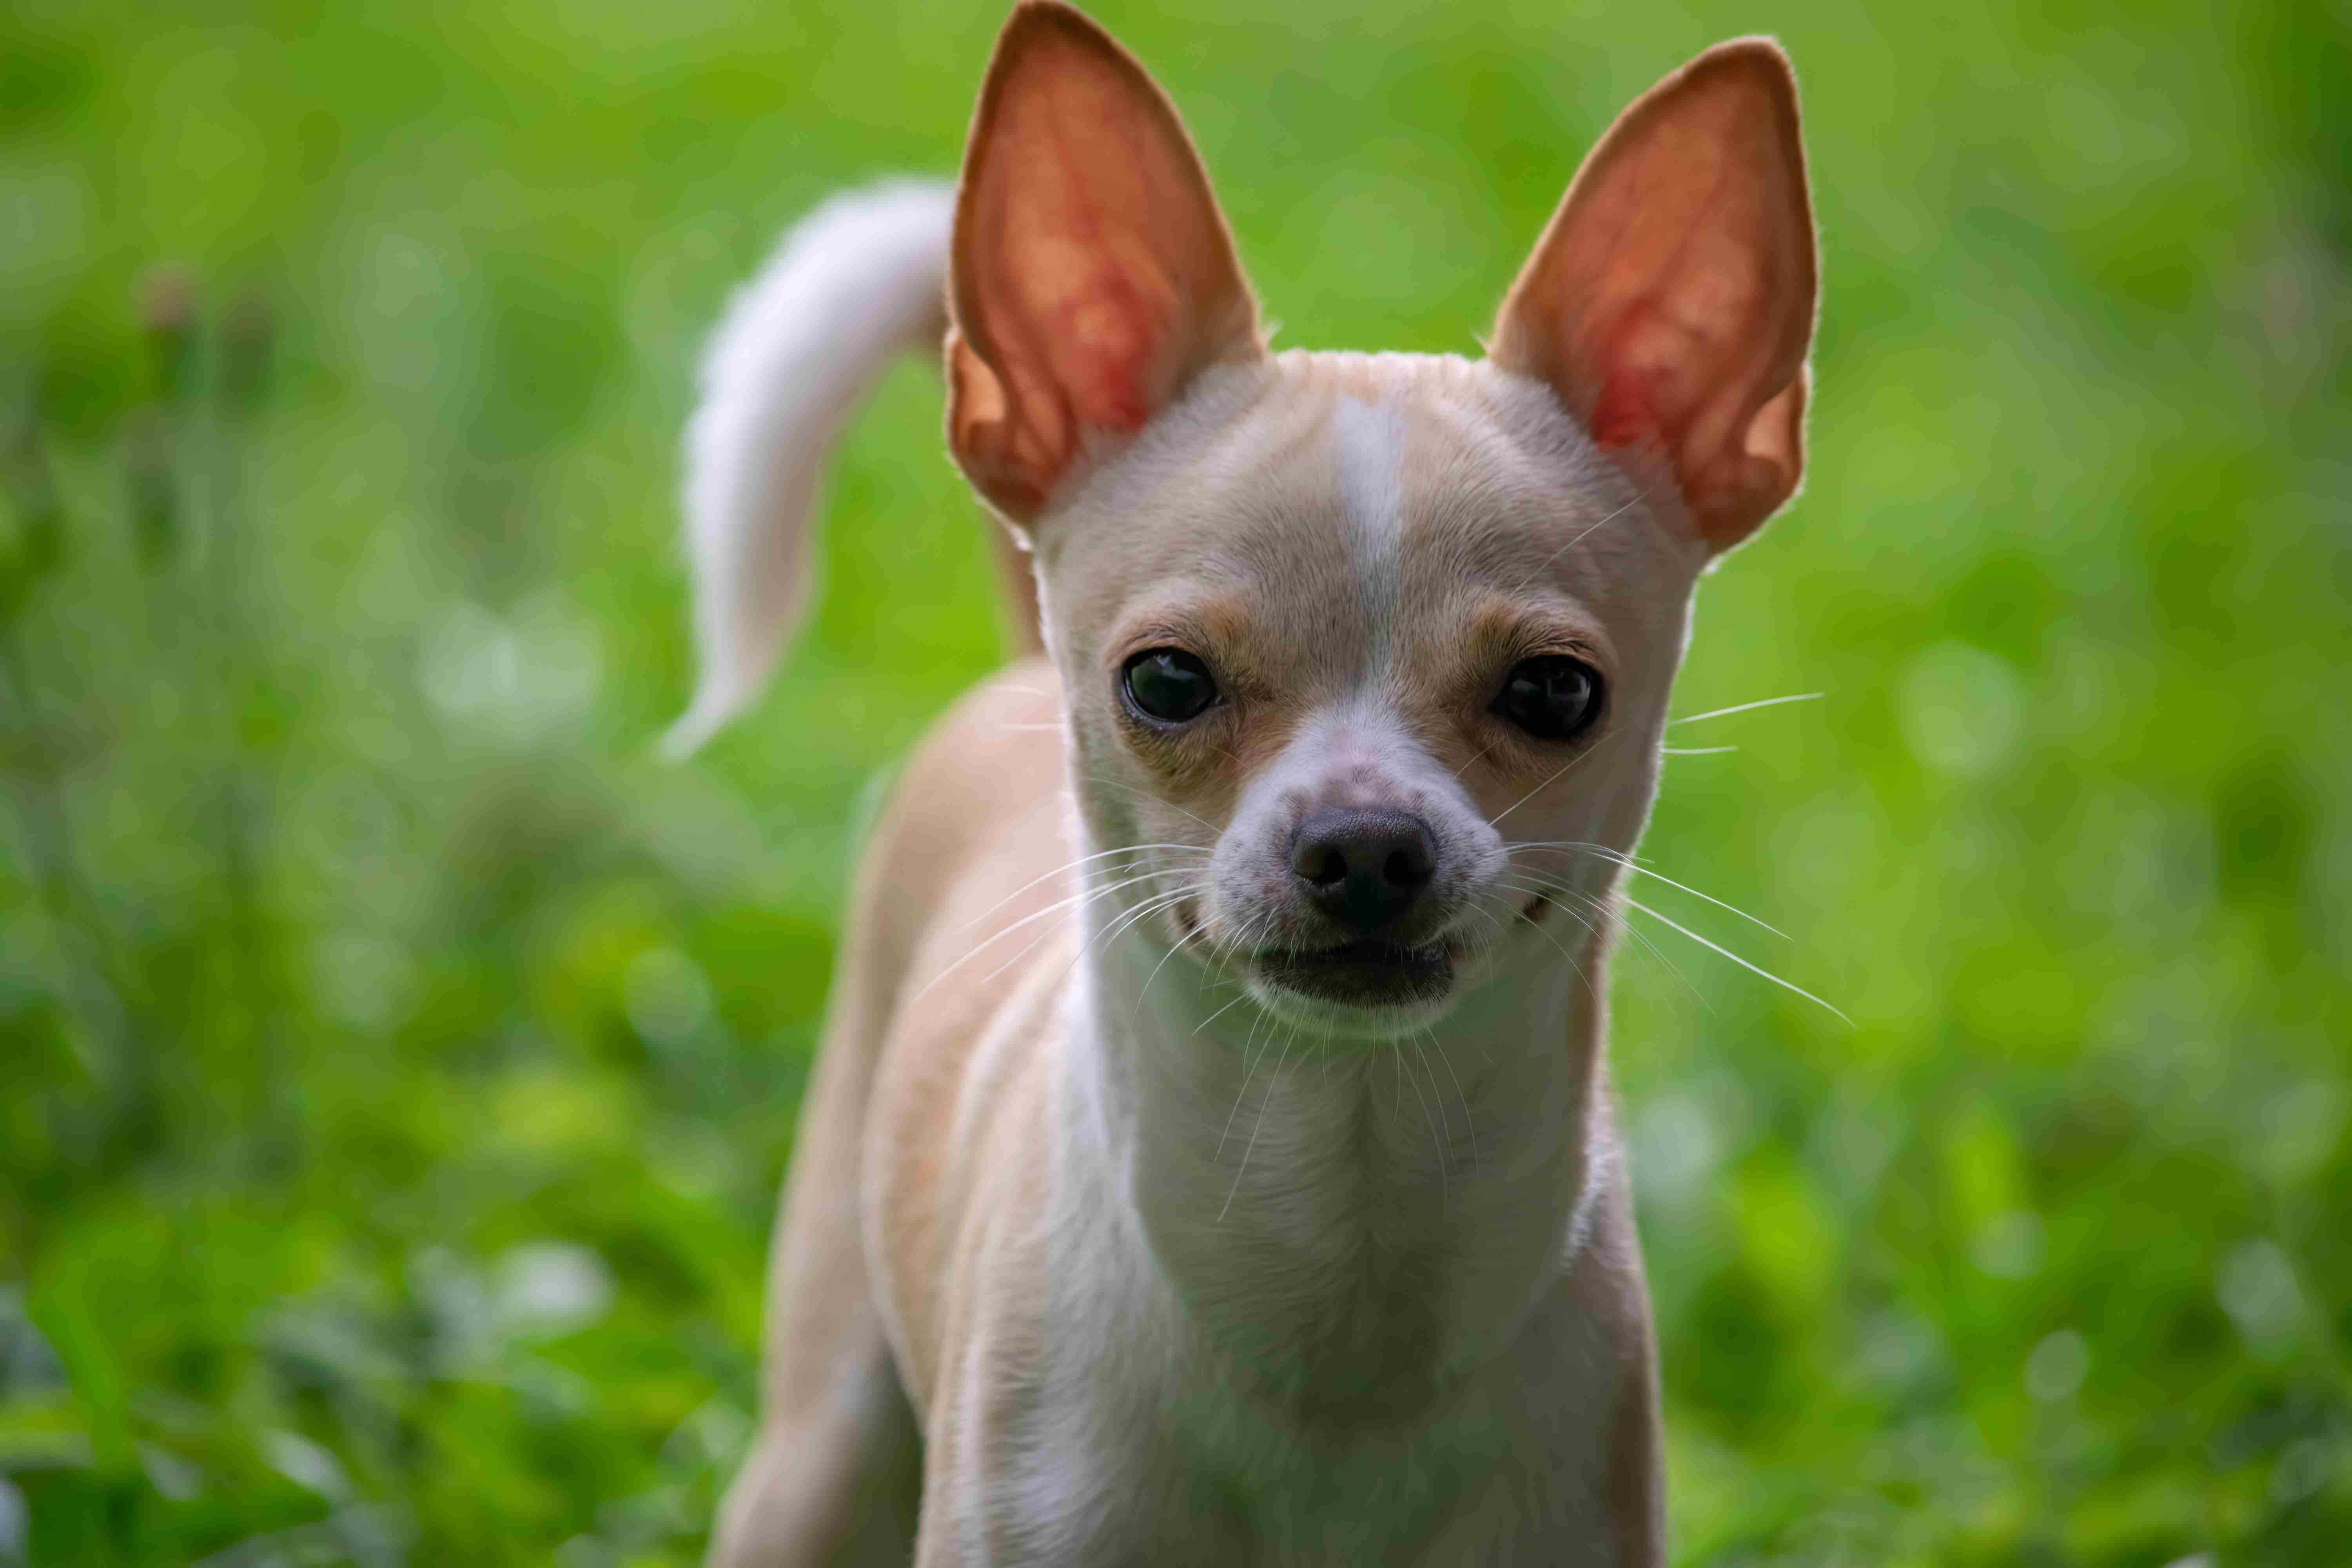 Can a Chihuahua's anger issues be influenced by their diet?